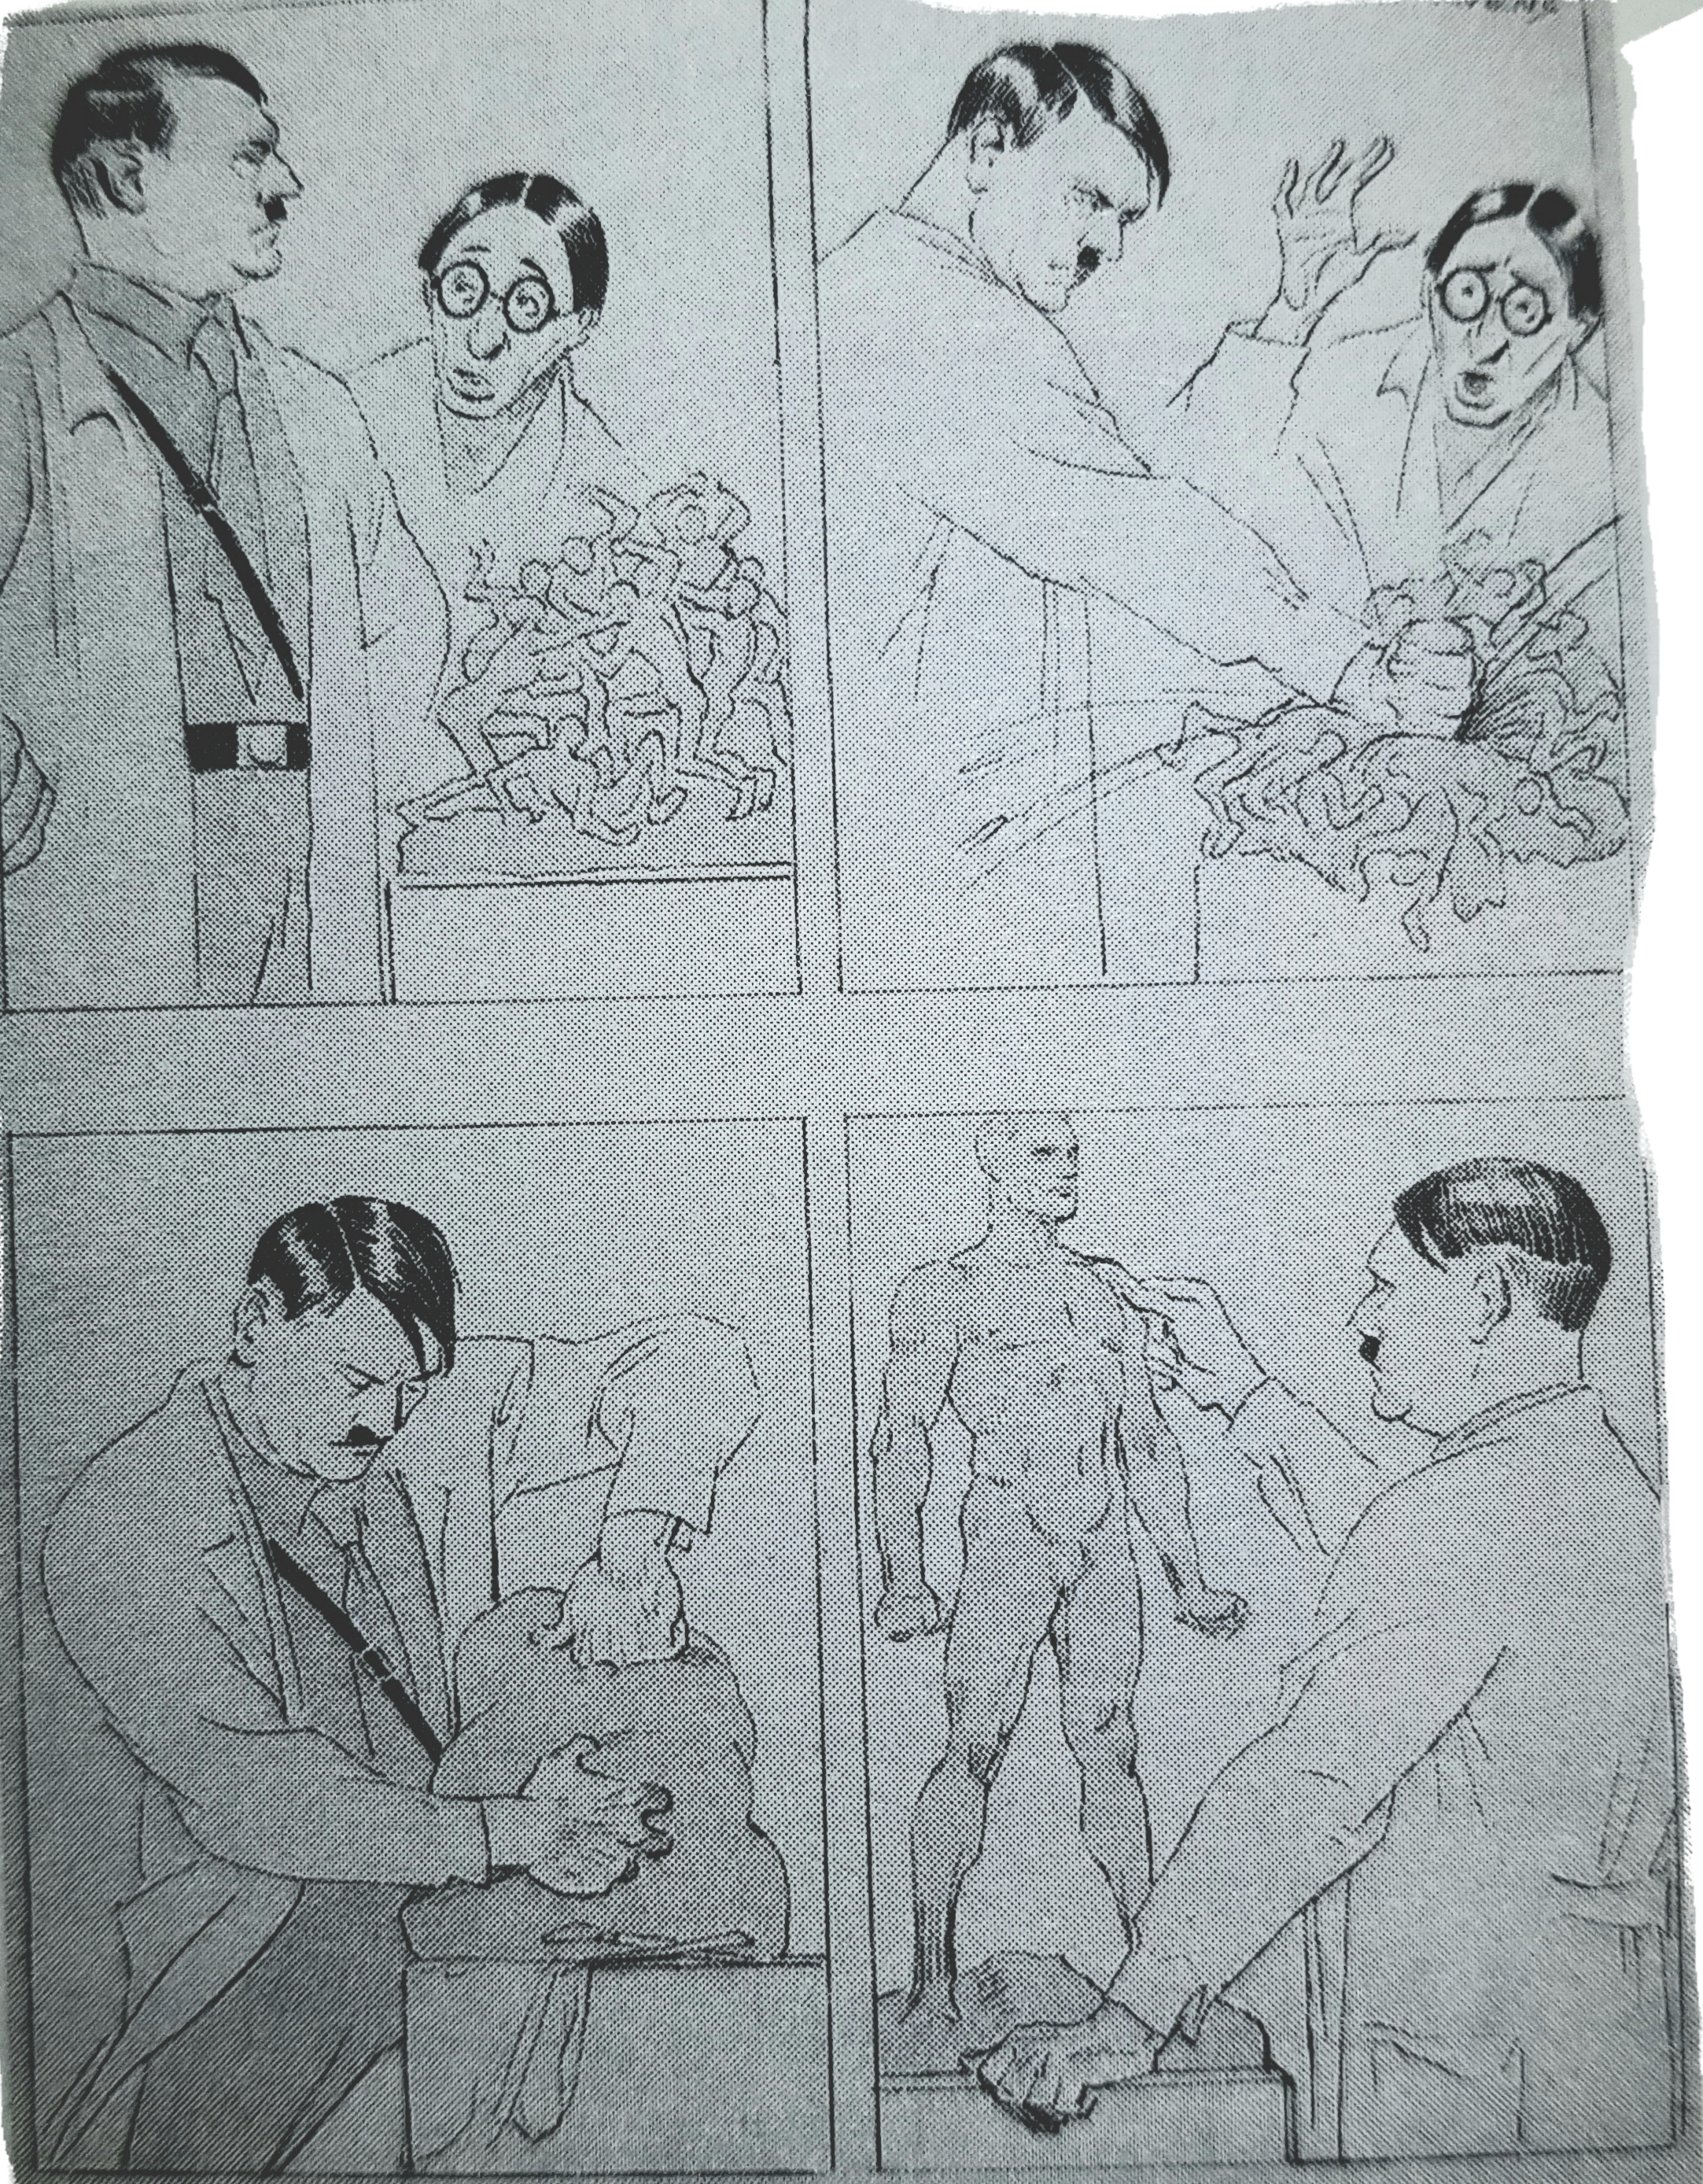 A Nazi cartoon from 1933. Hitler is presented as a sculptor who creates superhuma.png